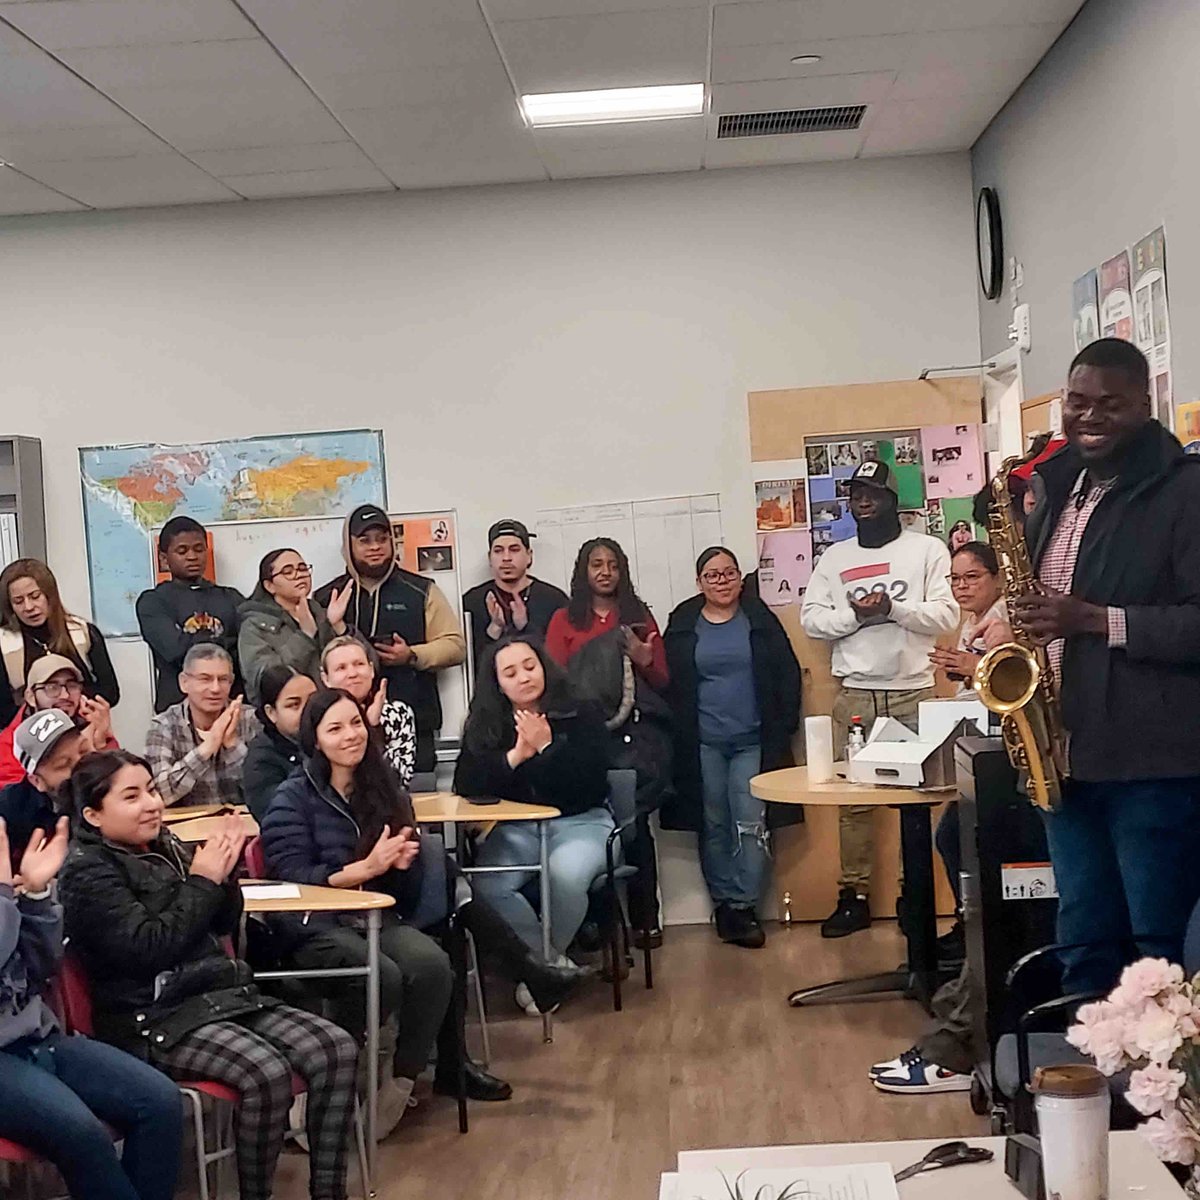 A fantastic saxophonist paid a visit to El Centro students, and they all had a great time singing along to folk tunes and various national anthems from their home countries. What a wonderful afternoon!

#CatholicCharities #Boston #Nonprofit #ESOL